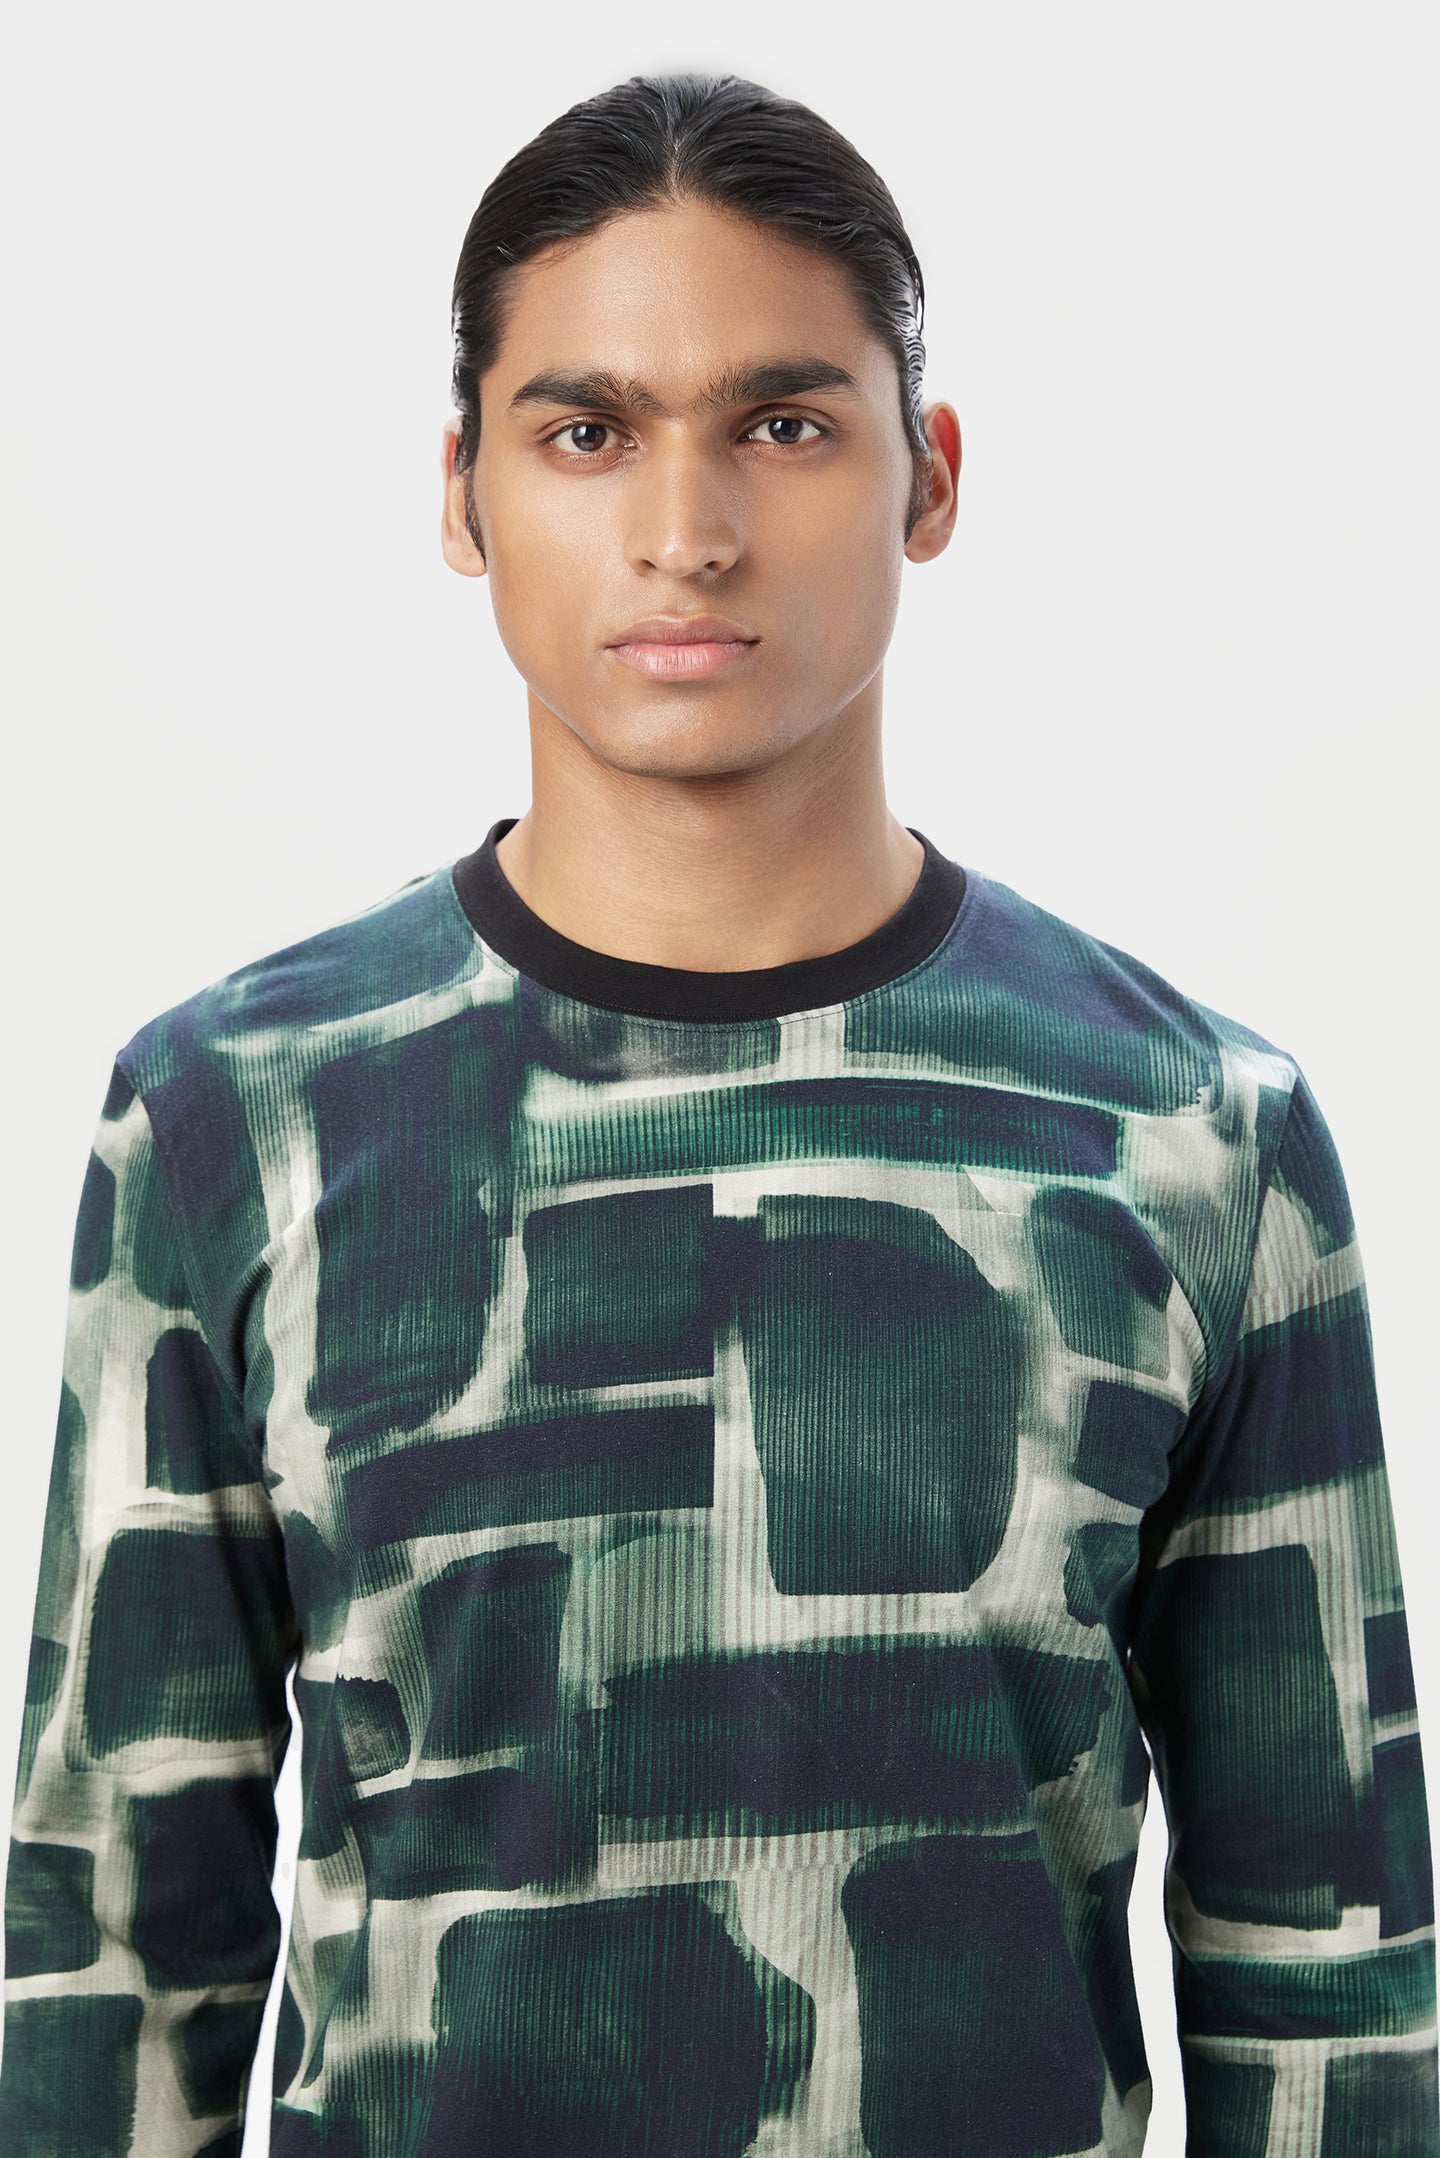 Regular Fit Full Sleeve T-Shirt in All-Over Abstract Print